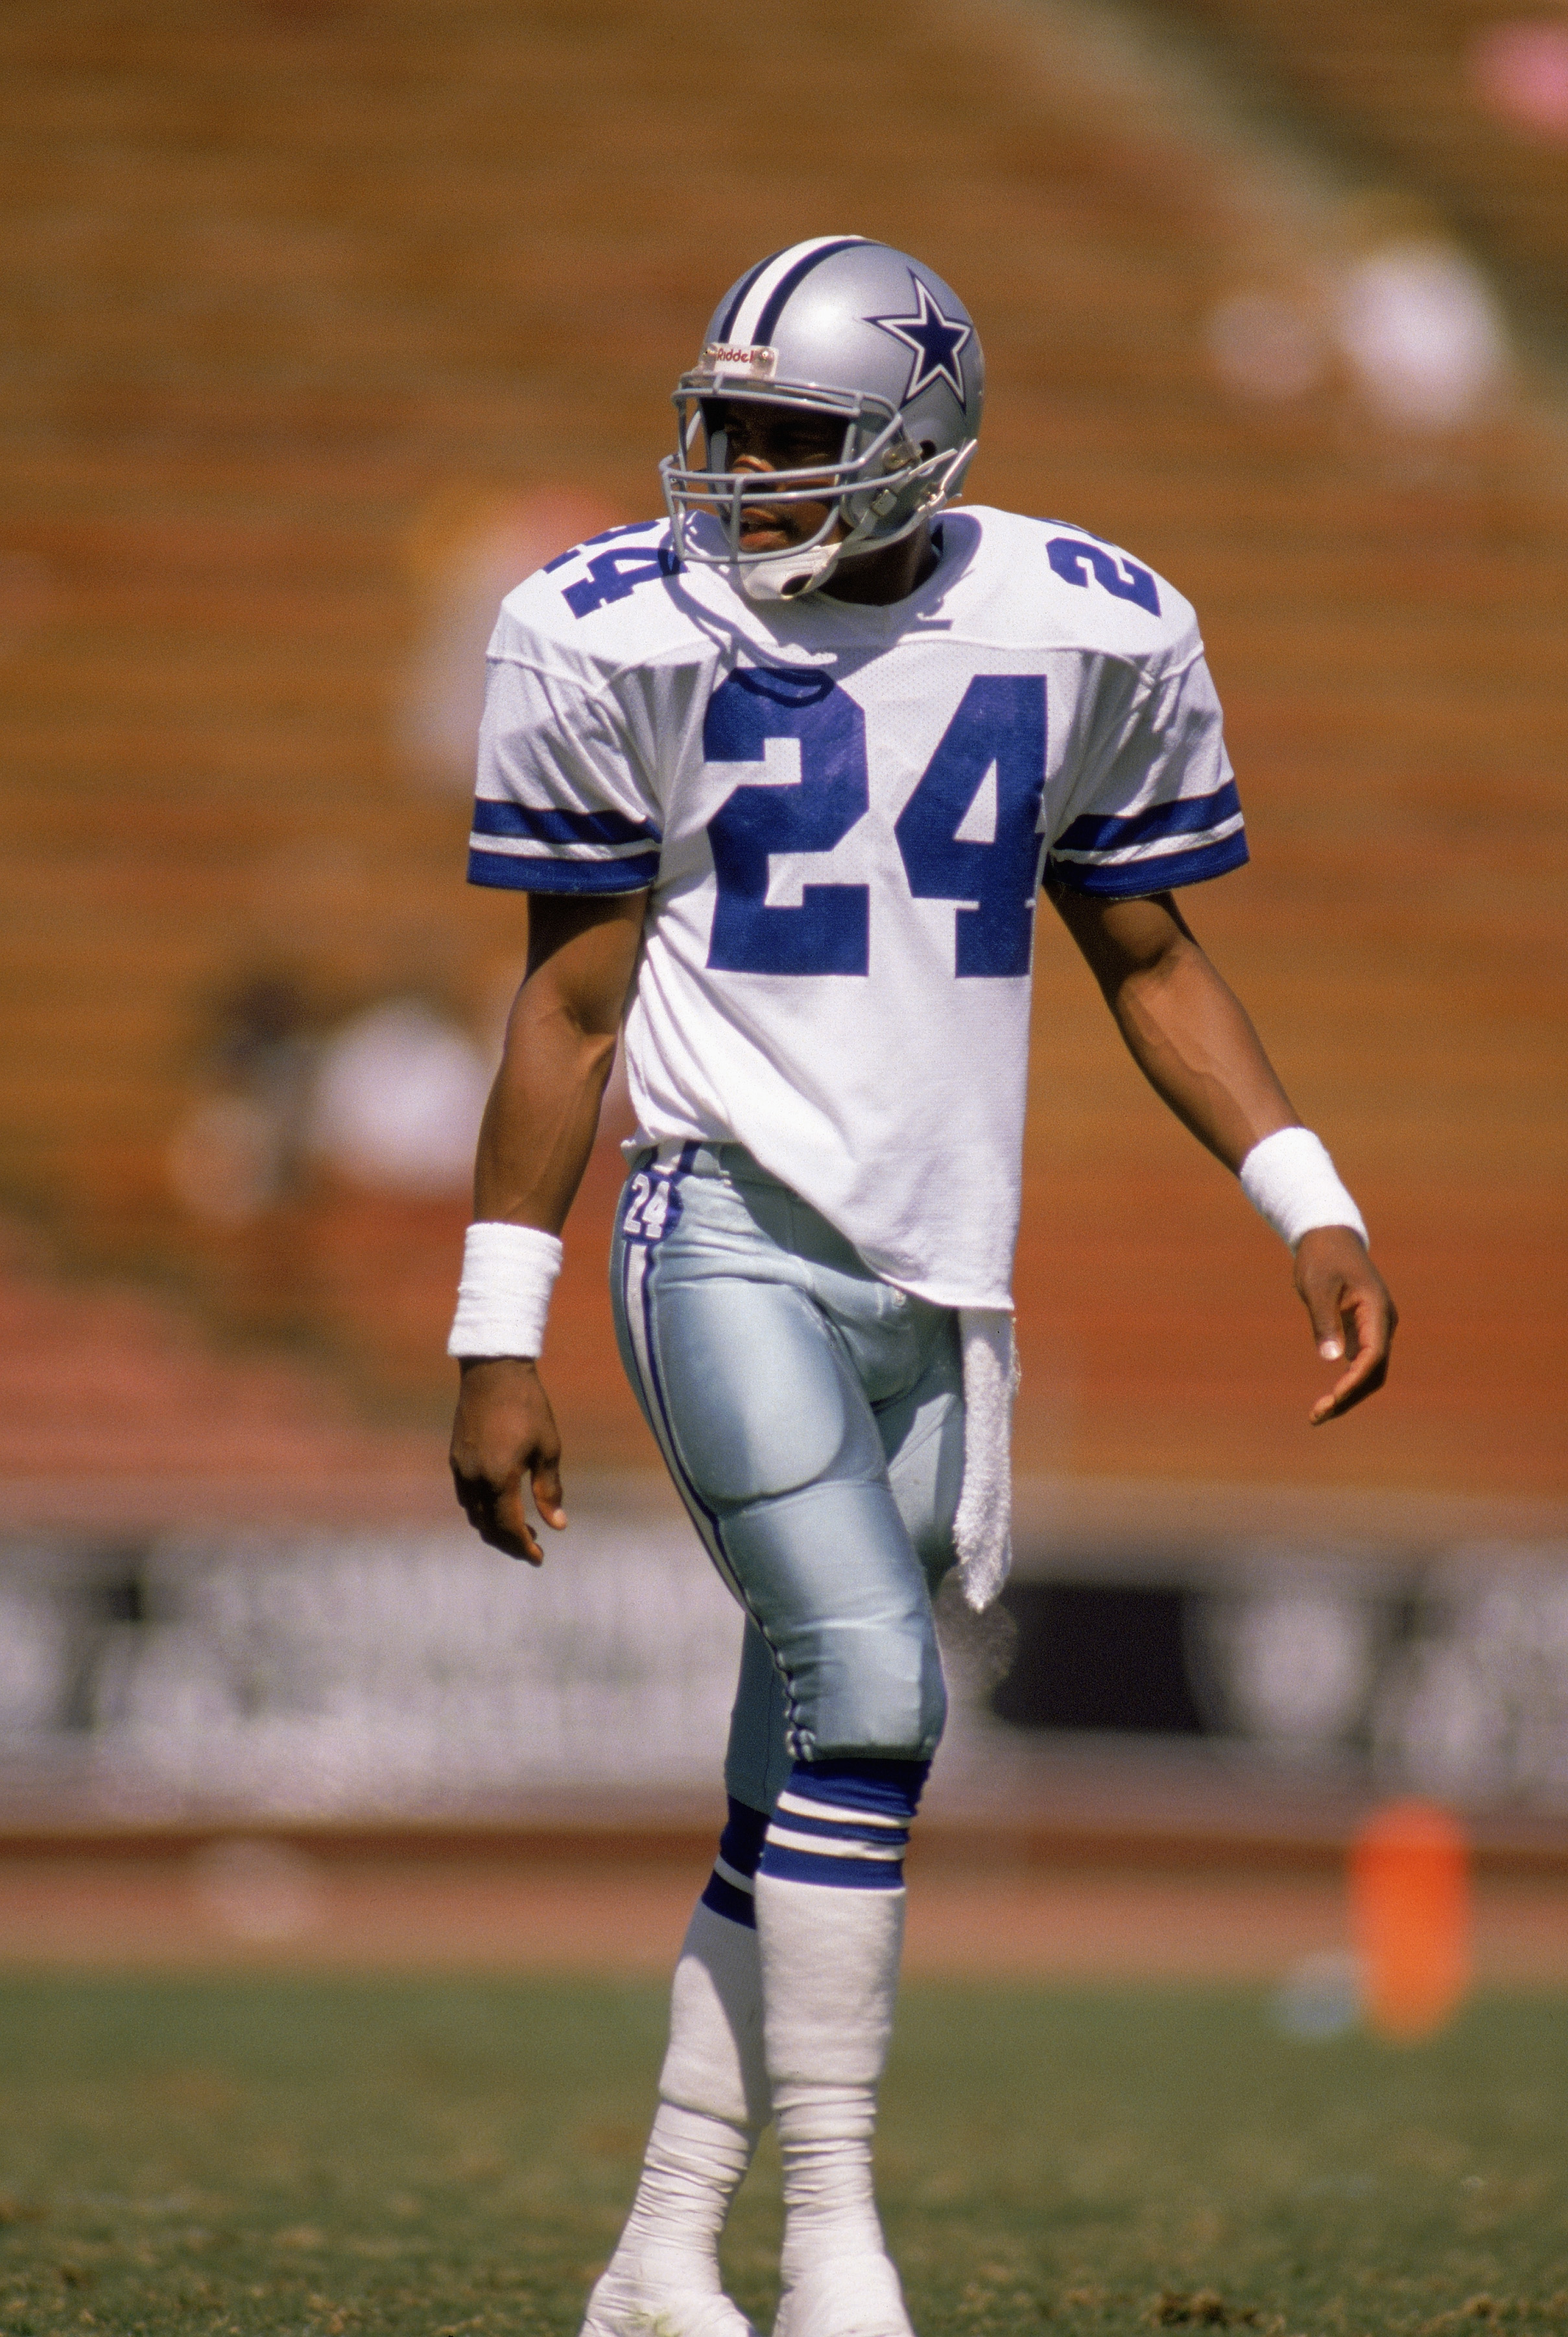 LOS ANGELES ?? AUGUST 13:  Everson Walls #24 of the Dallas Cowboys stands on the field during a NFL game against the Los Angeles Raiders on August 13, 1988 at the LA Memorial Coliseum in Los Angeles, California.  (Photo by Allen Dean Steele/Getty Images)